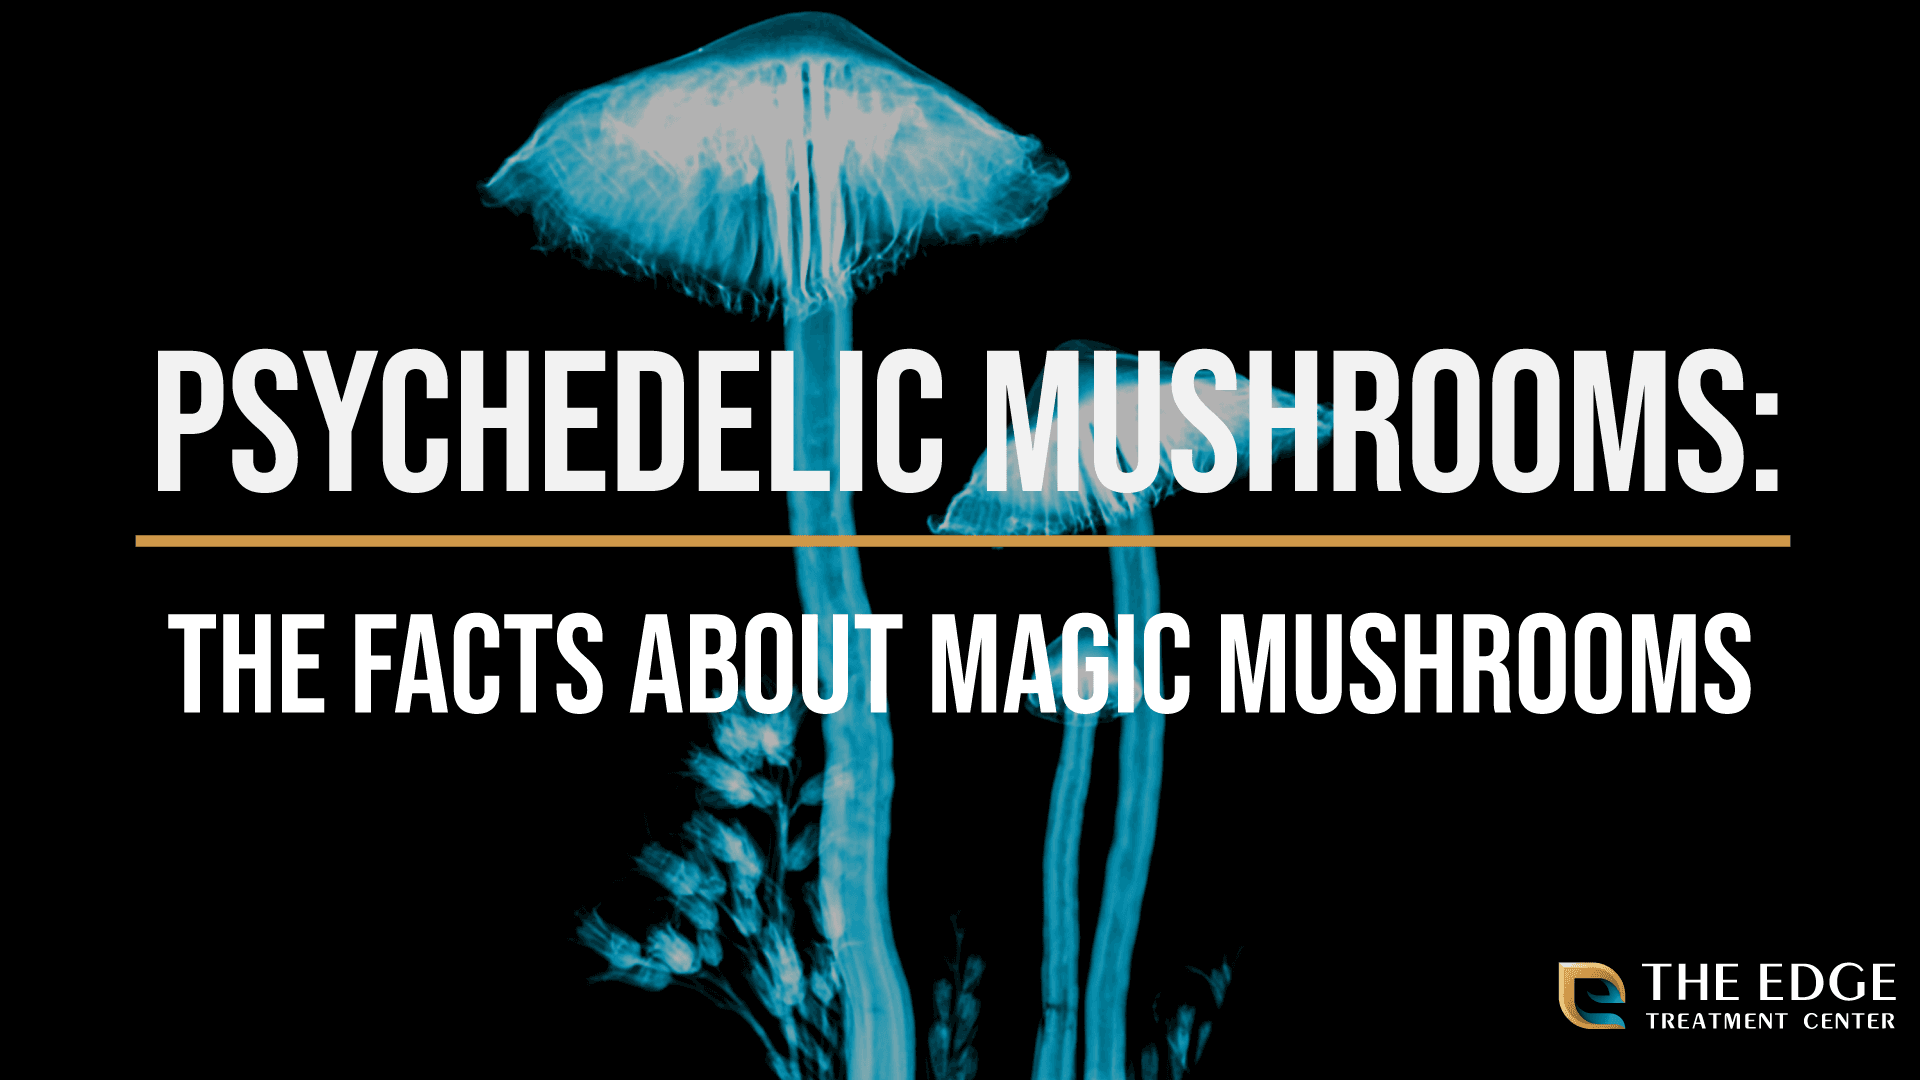 What Are Psychedelic Mushrooms?